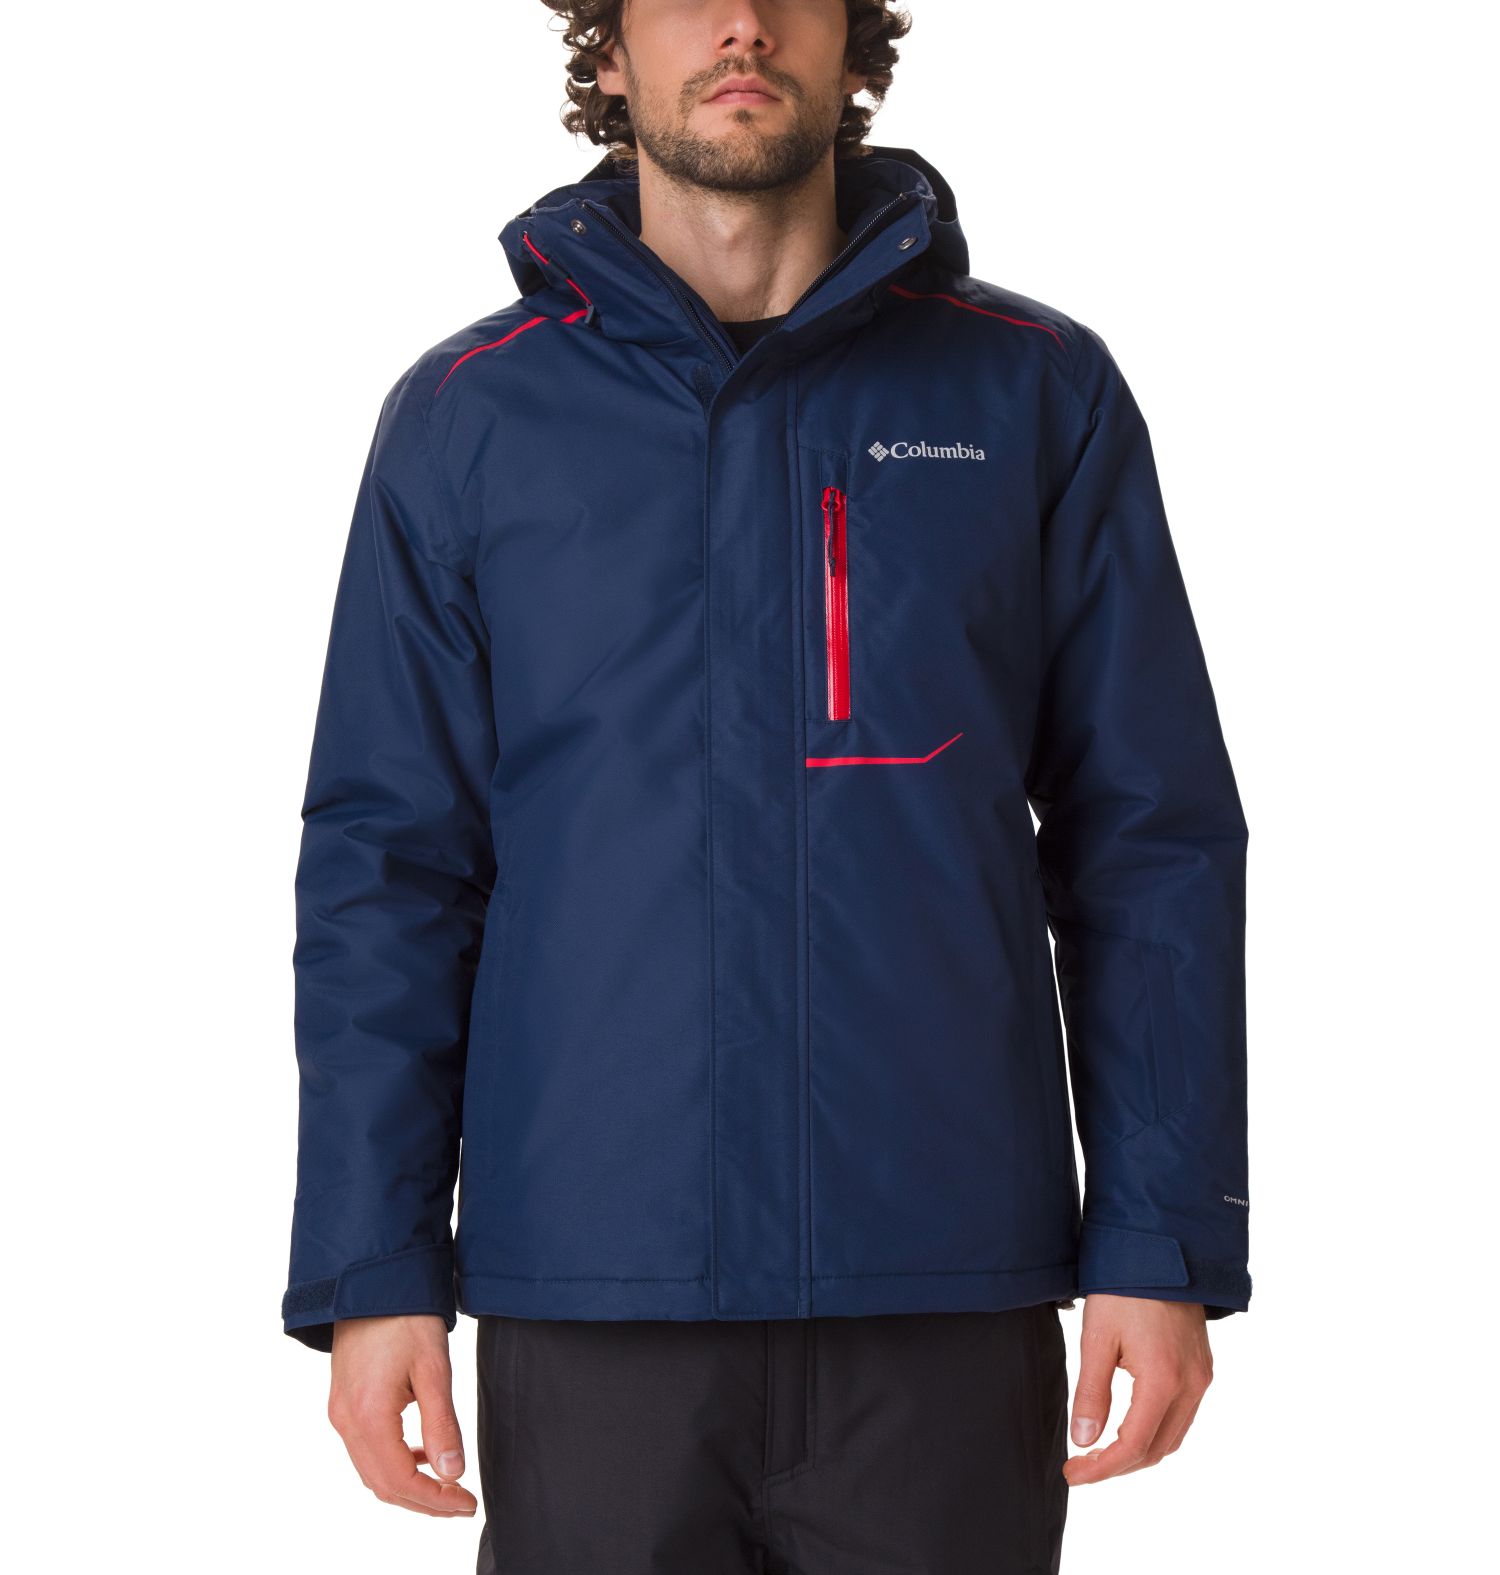 CHAQUETON RIDE ON 100GR MICROTEMP XF II 100% POLYESTER Omni-TECH WATERPROOF BREATHABLE Omni-HEAT REFLECTIVE COLLEGIATE NAVY/MOUNTAIN RED